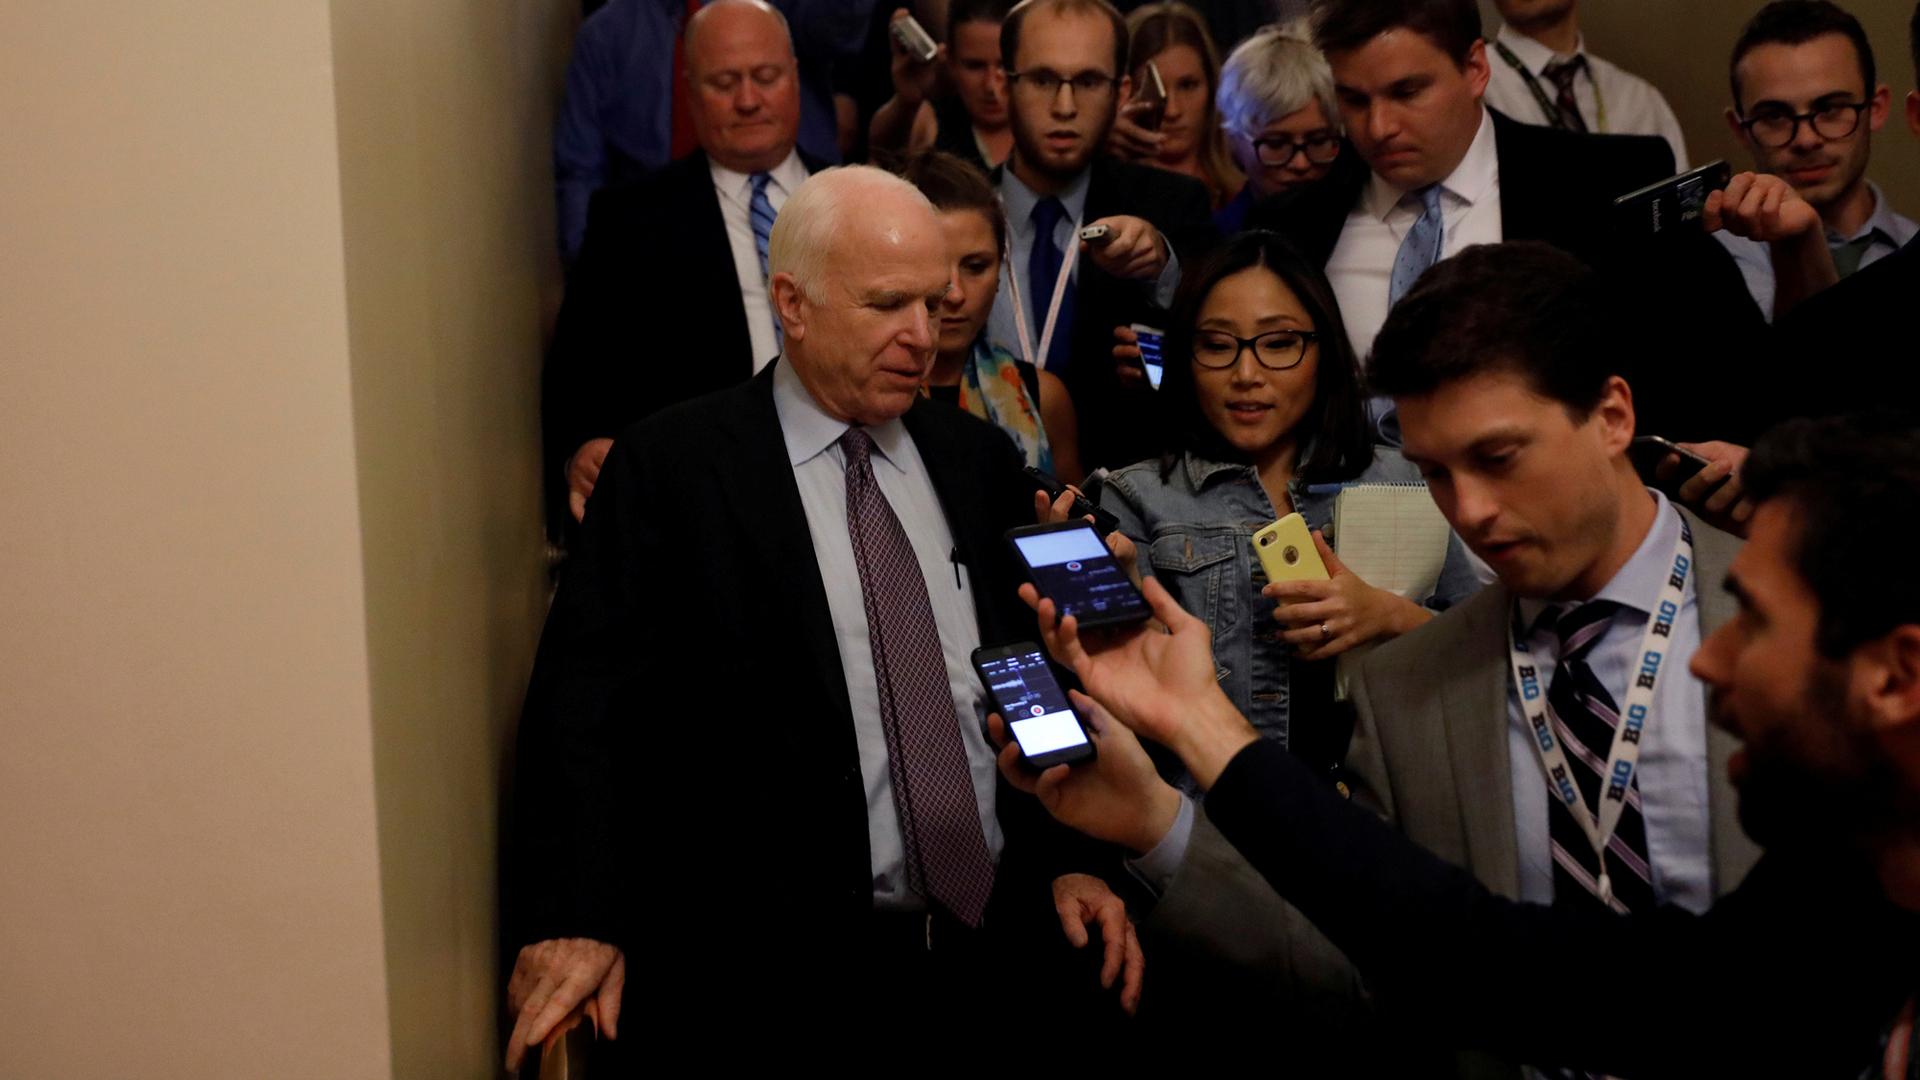 Senator John McCain speaks with reporters after voting against the "skinny repeal" health care bill on Capitol Hill in Washington, July 28, 2017.